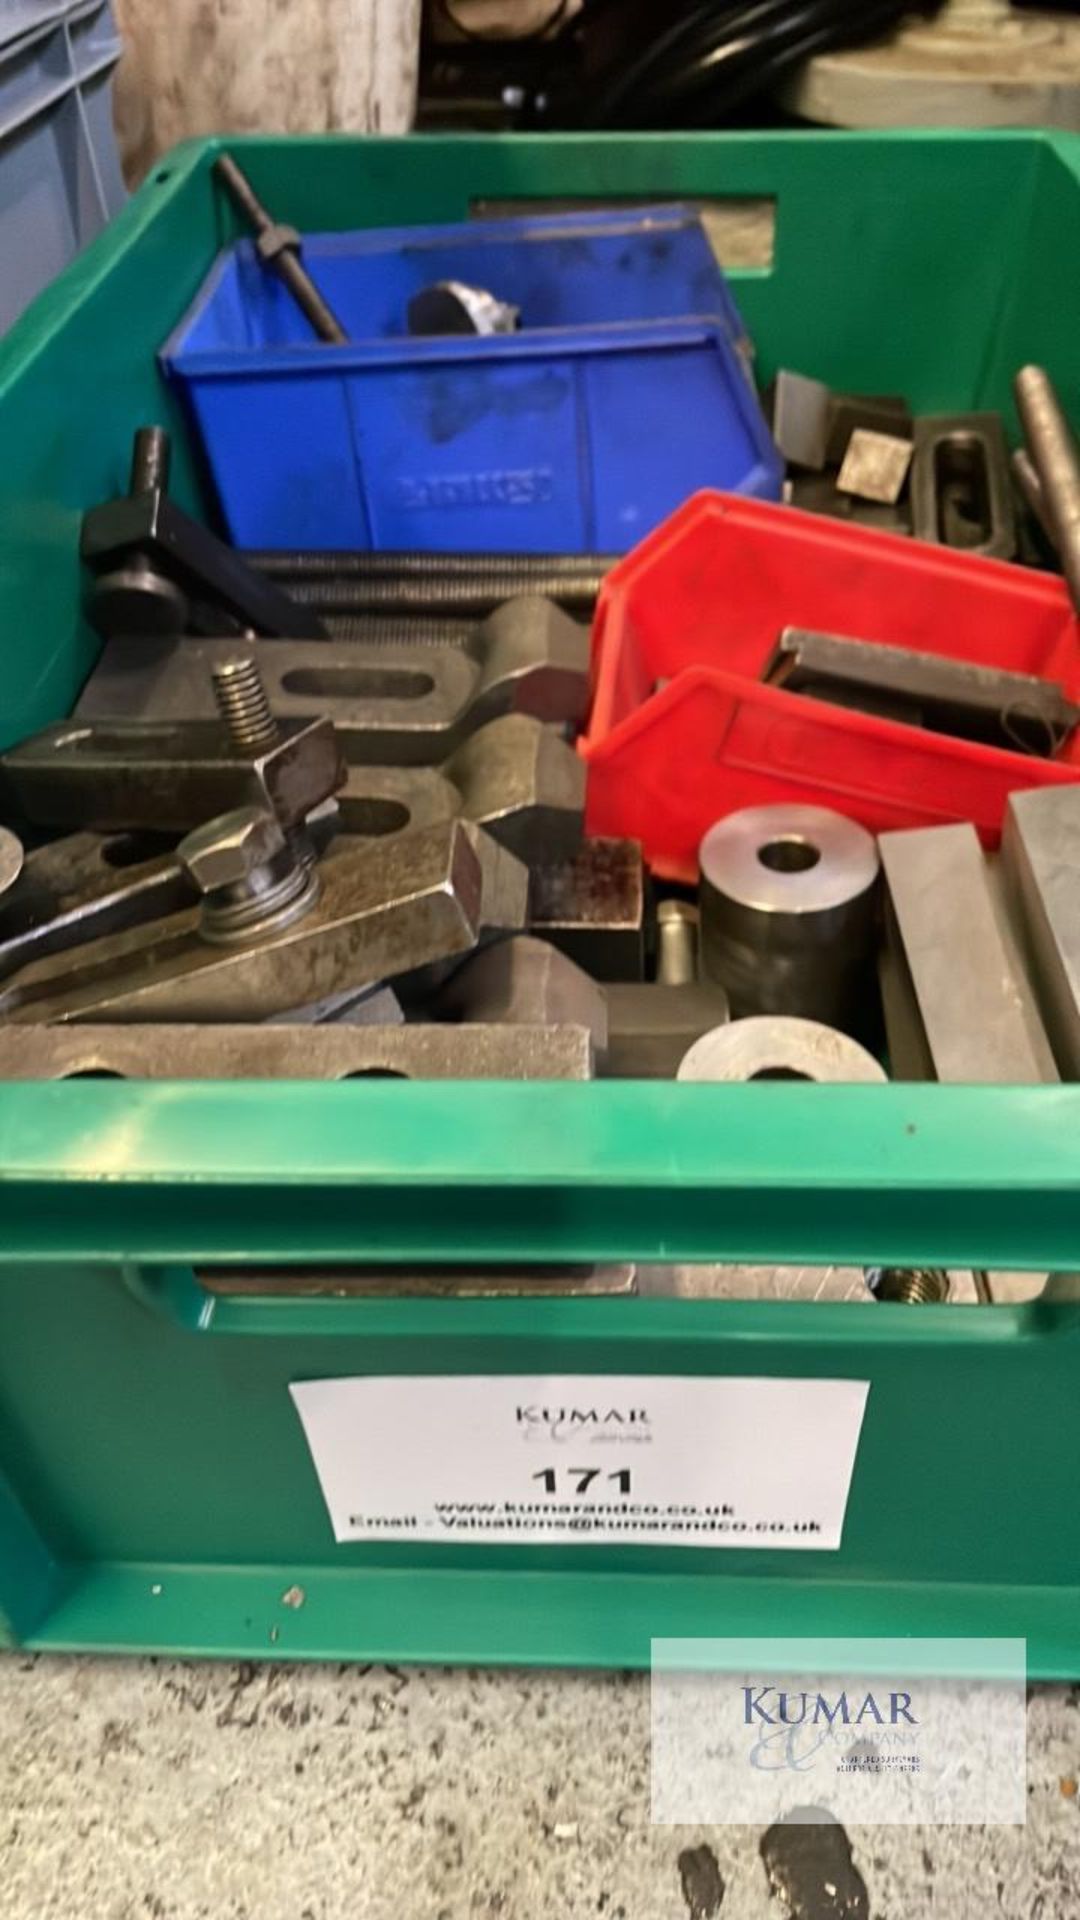 Assorted Machine Clamping Equipment (Please note, Does not include Plastic Containers)